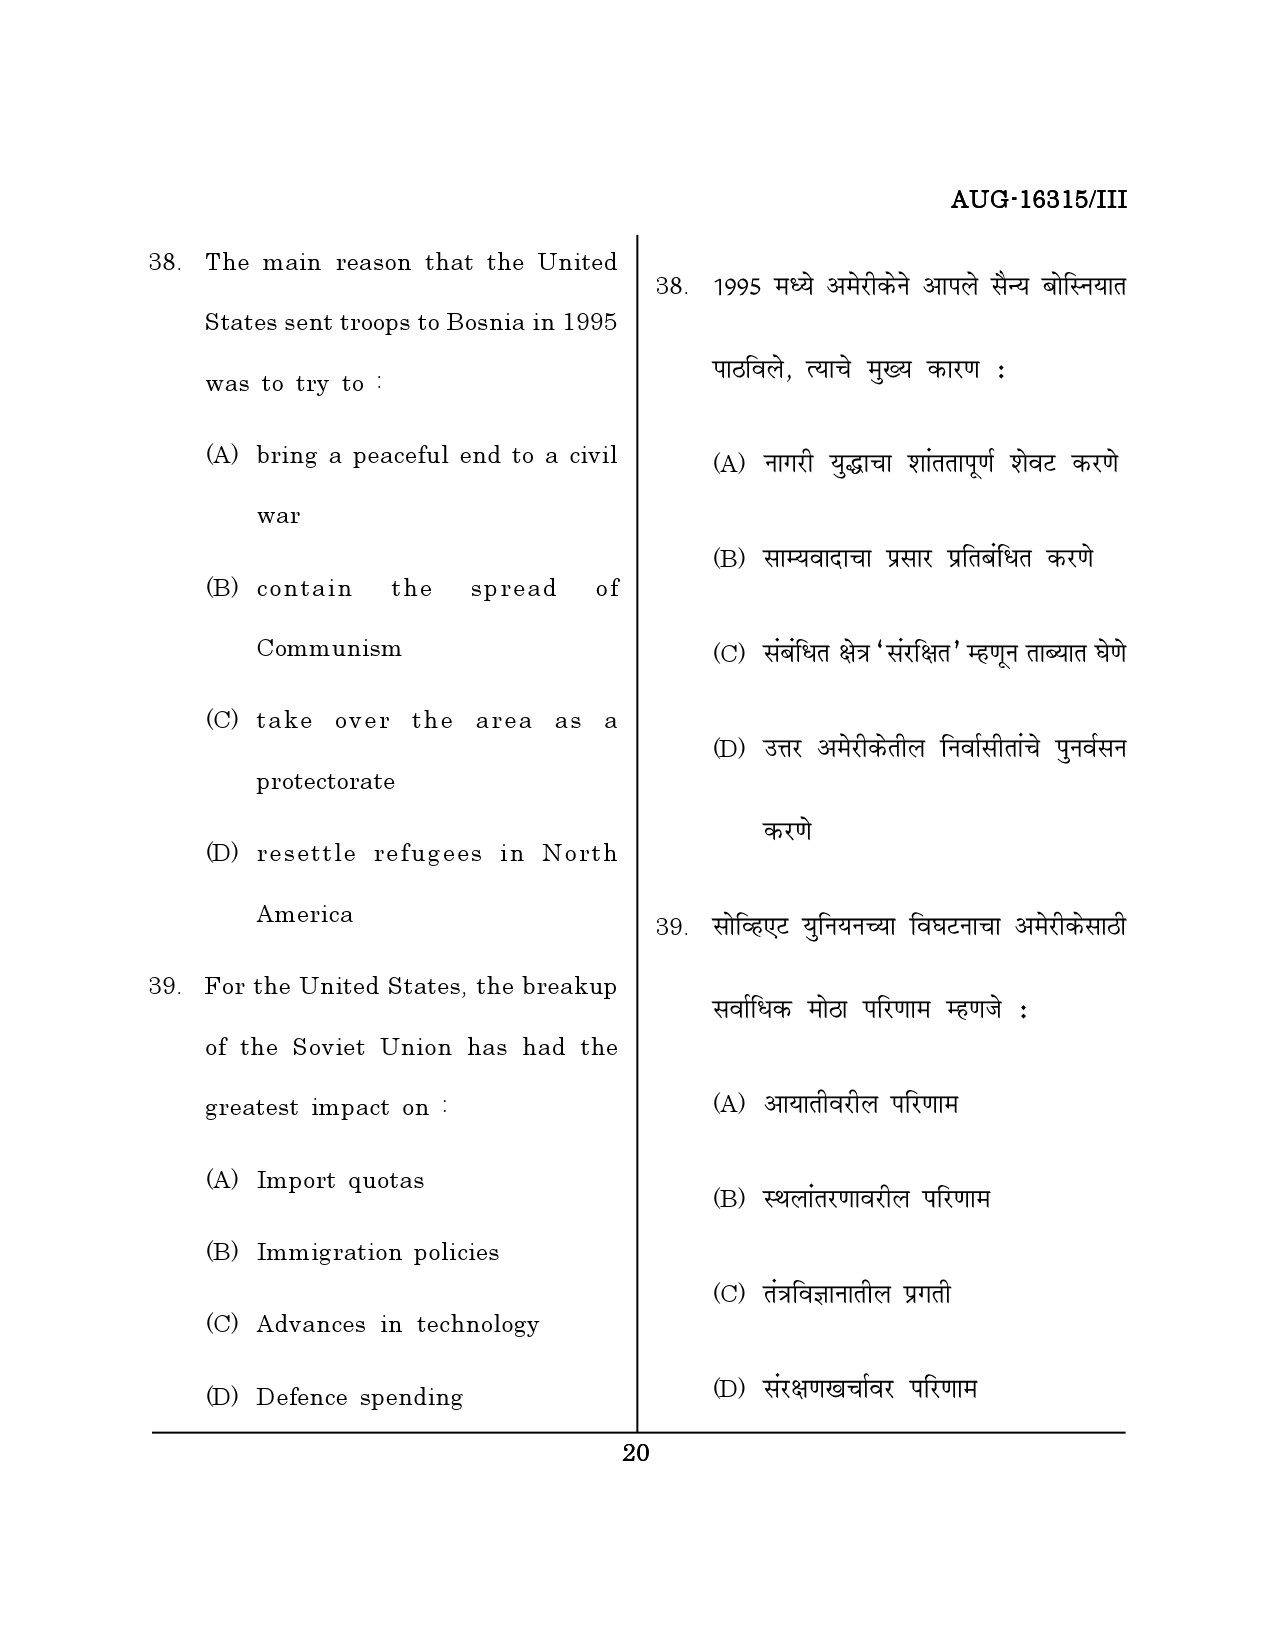 Maharashtra SET Defence and Strategic Studies Question Paper III August 2015 19